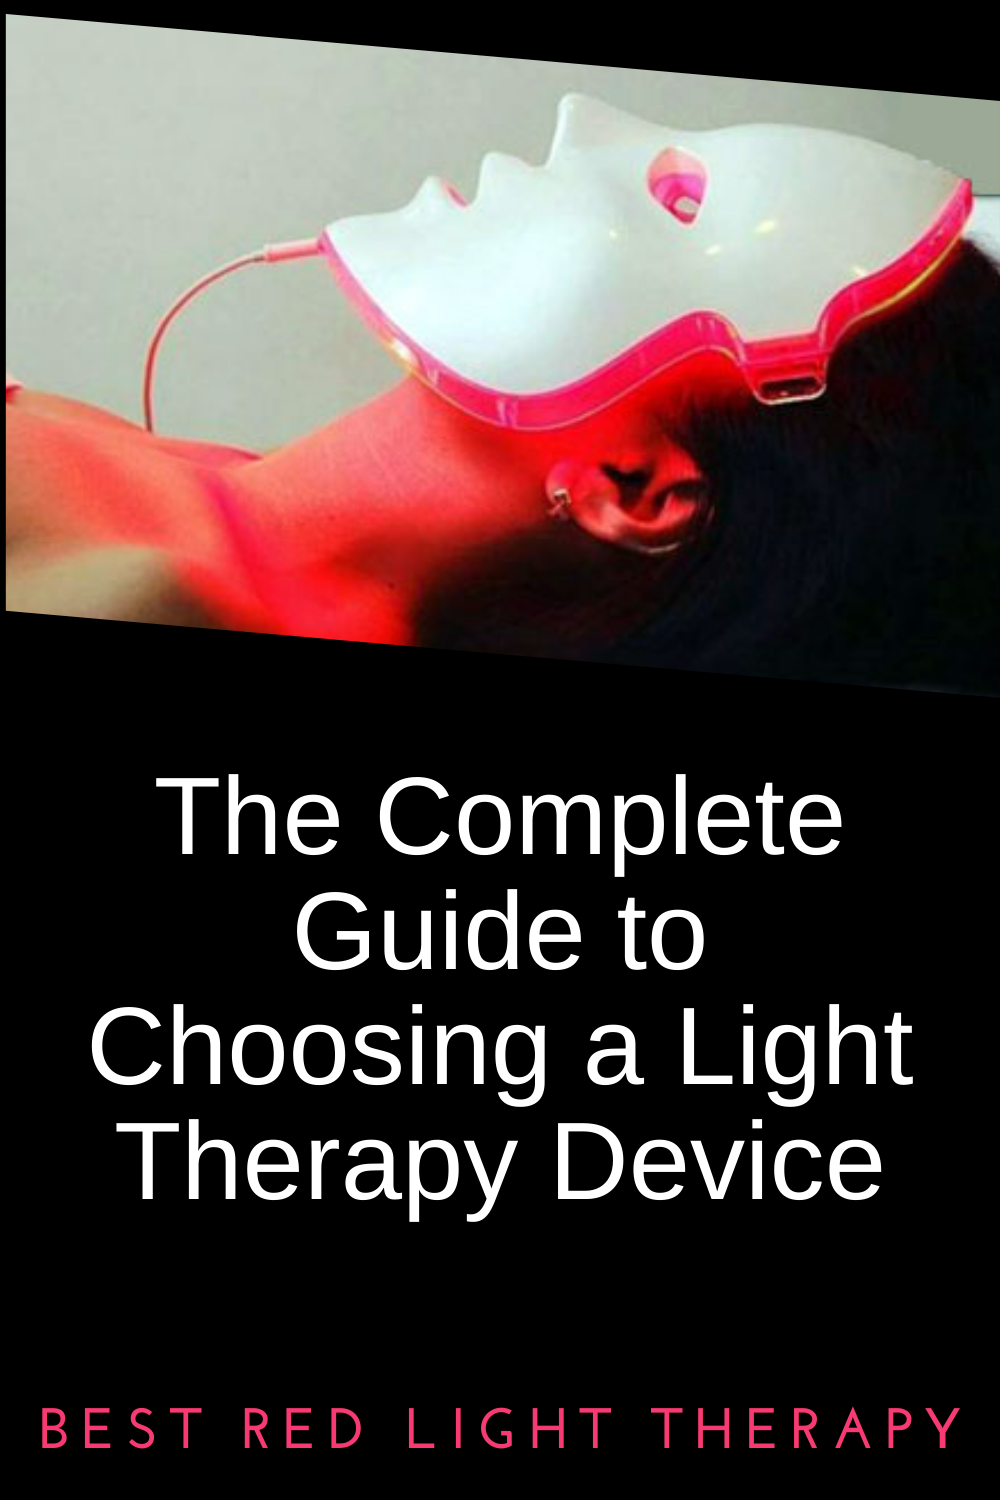 Complete guide to choosing a red light therapy device